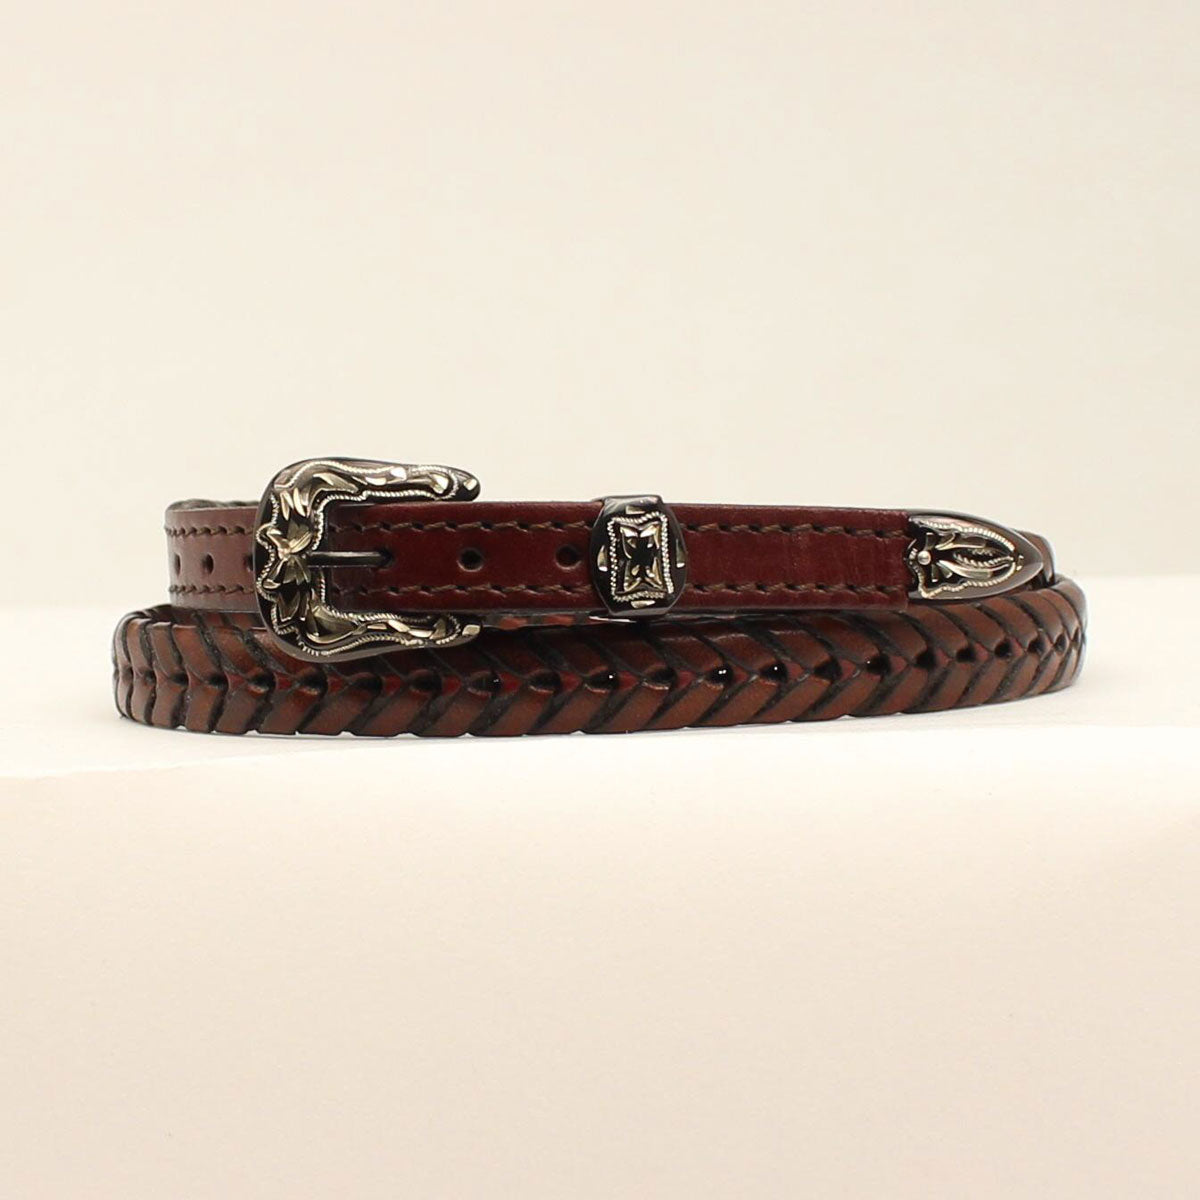 Twister Laced Brown Hatband with 3 Piece Buckle Set